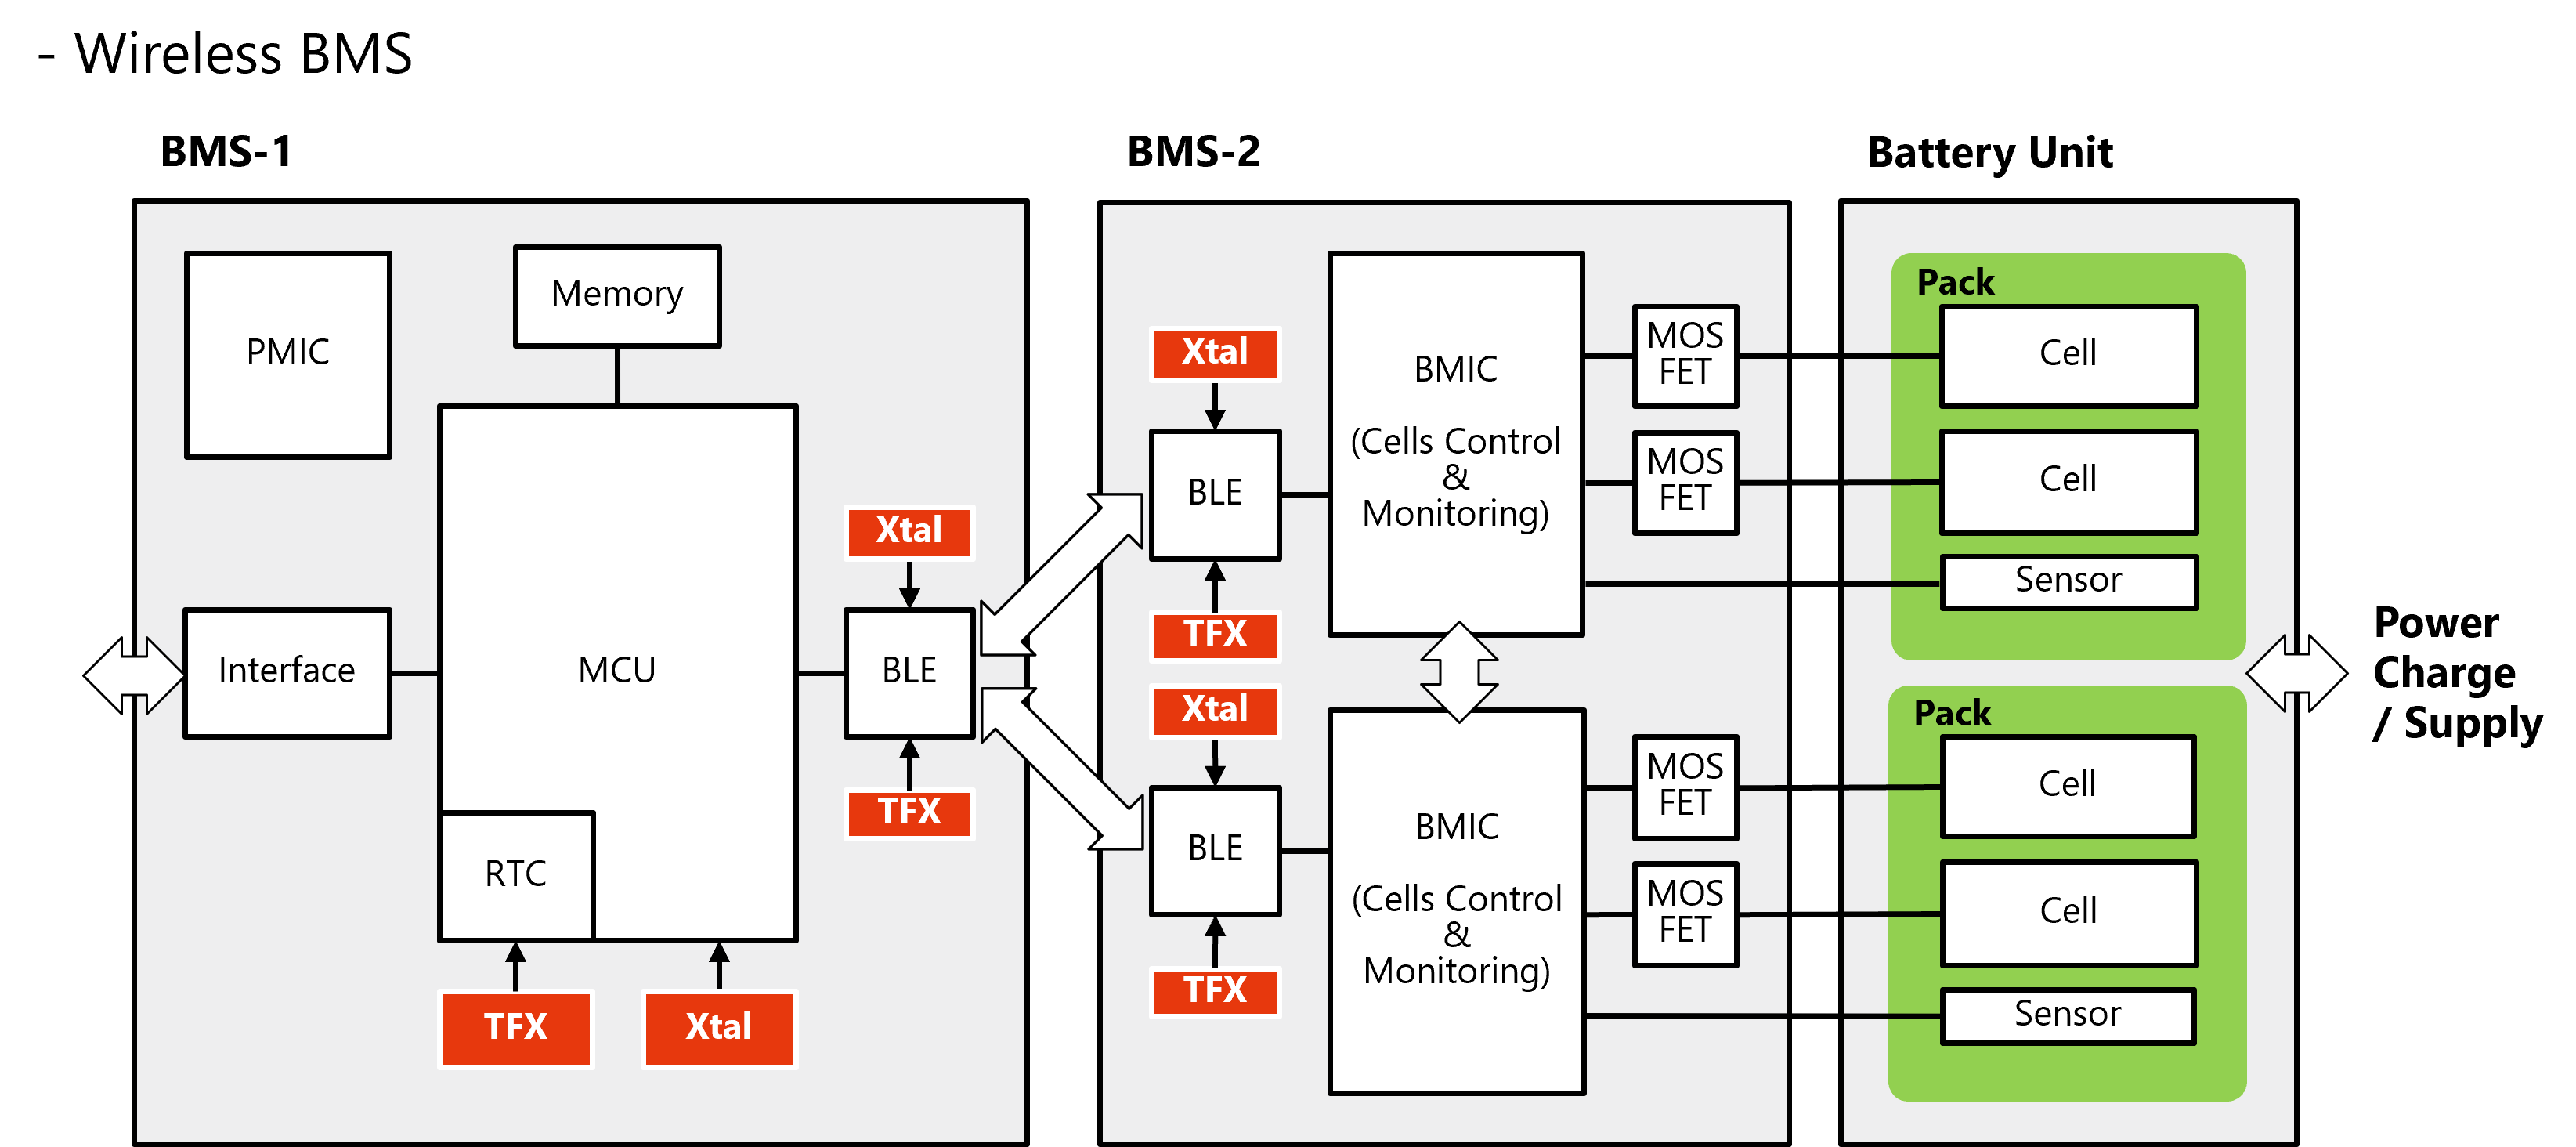 BlockDiagram_Electric_Wireless_BMS.png